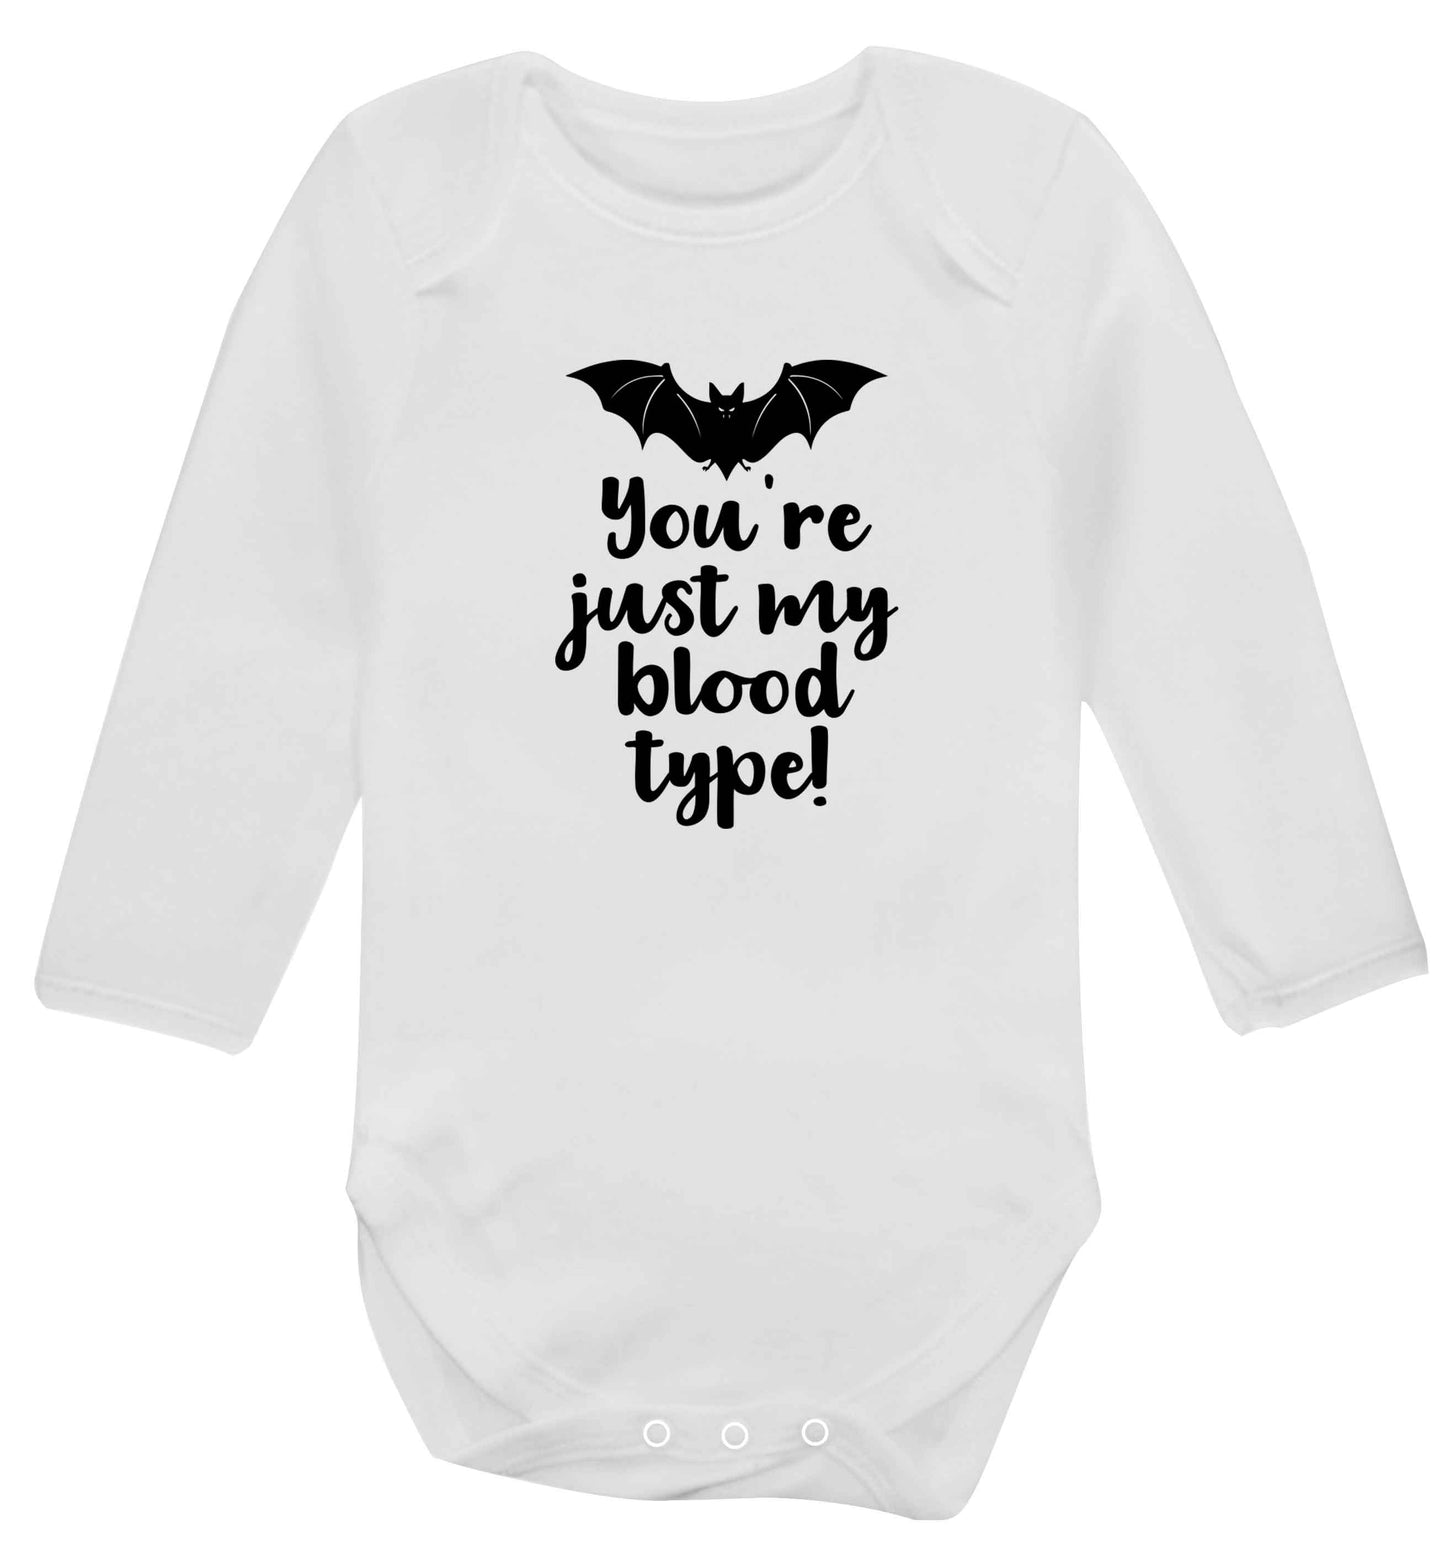 You're just my blood type baby vest long sleeved white 6-12 months